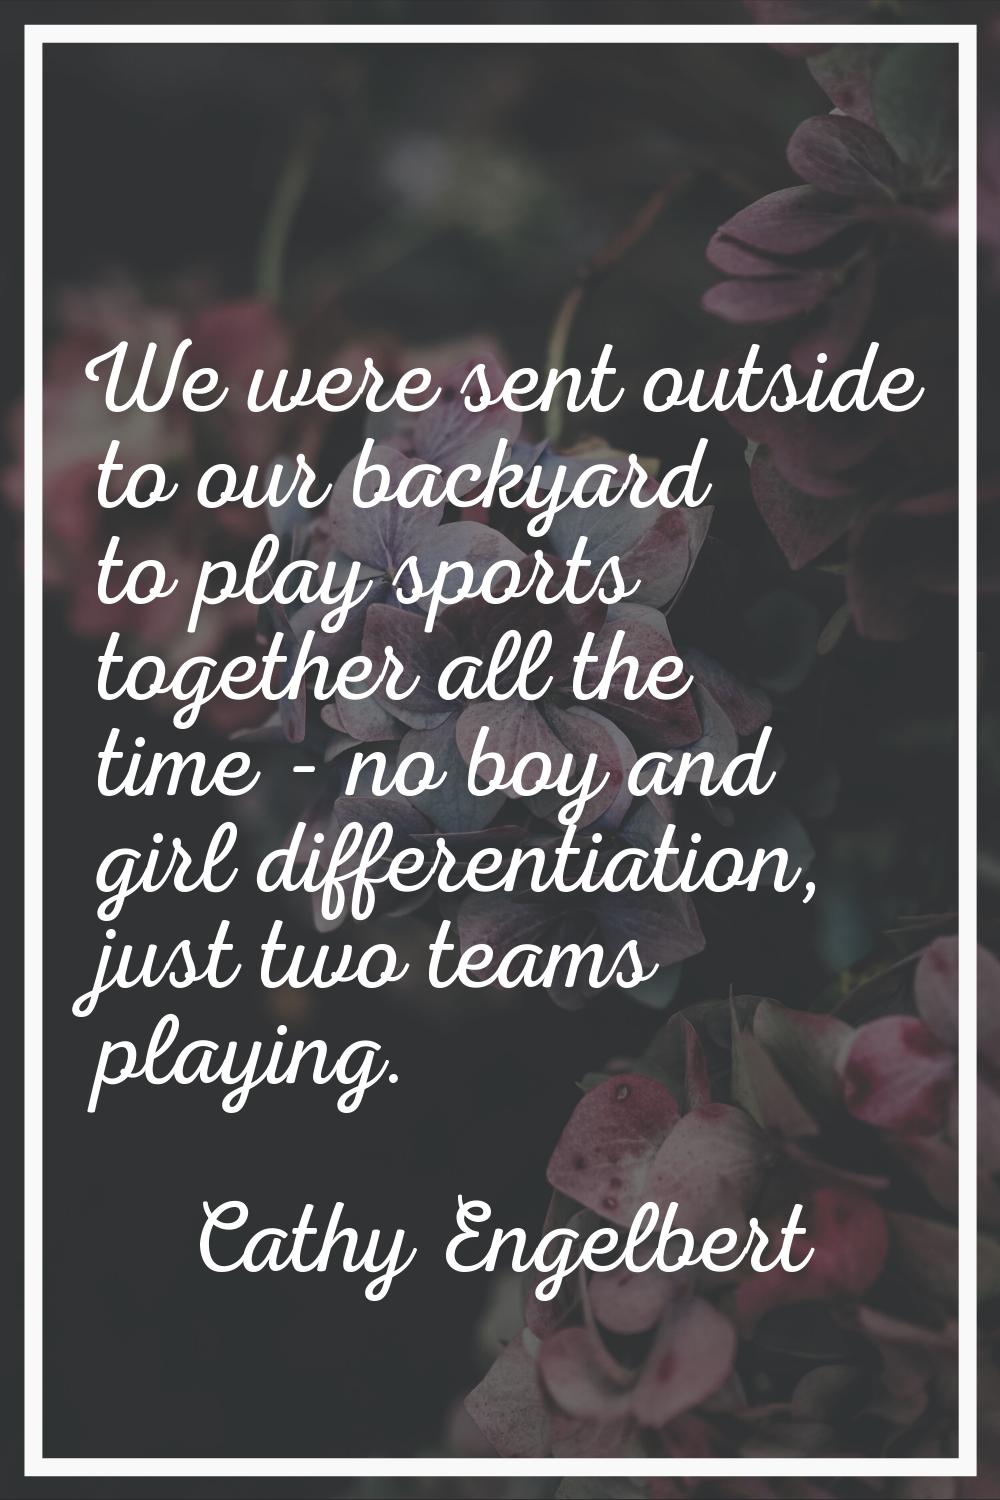 We were sent outside to our backyard to play sports together all the time - no boy and girl differe